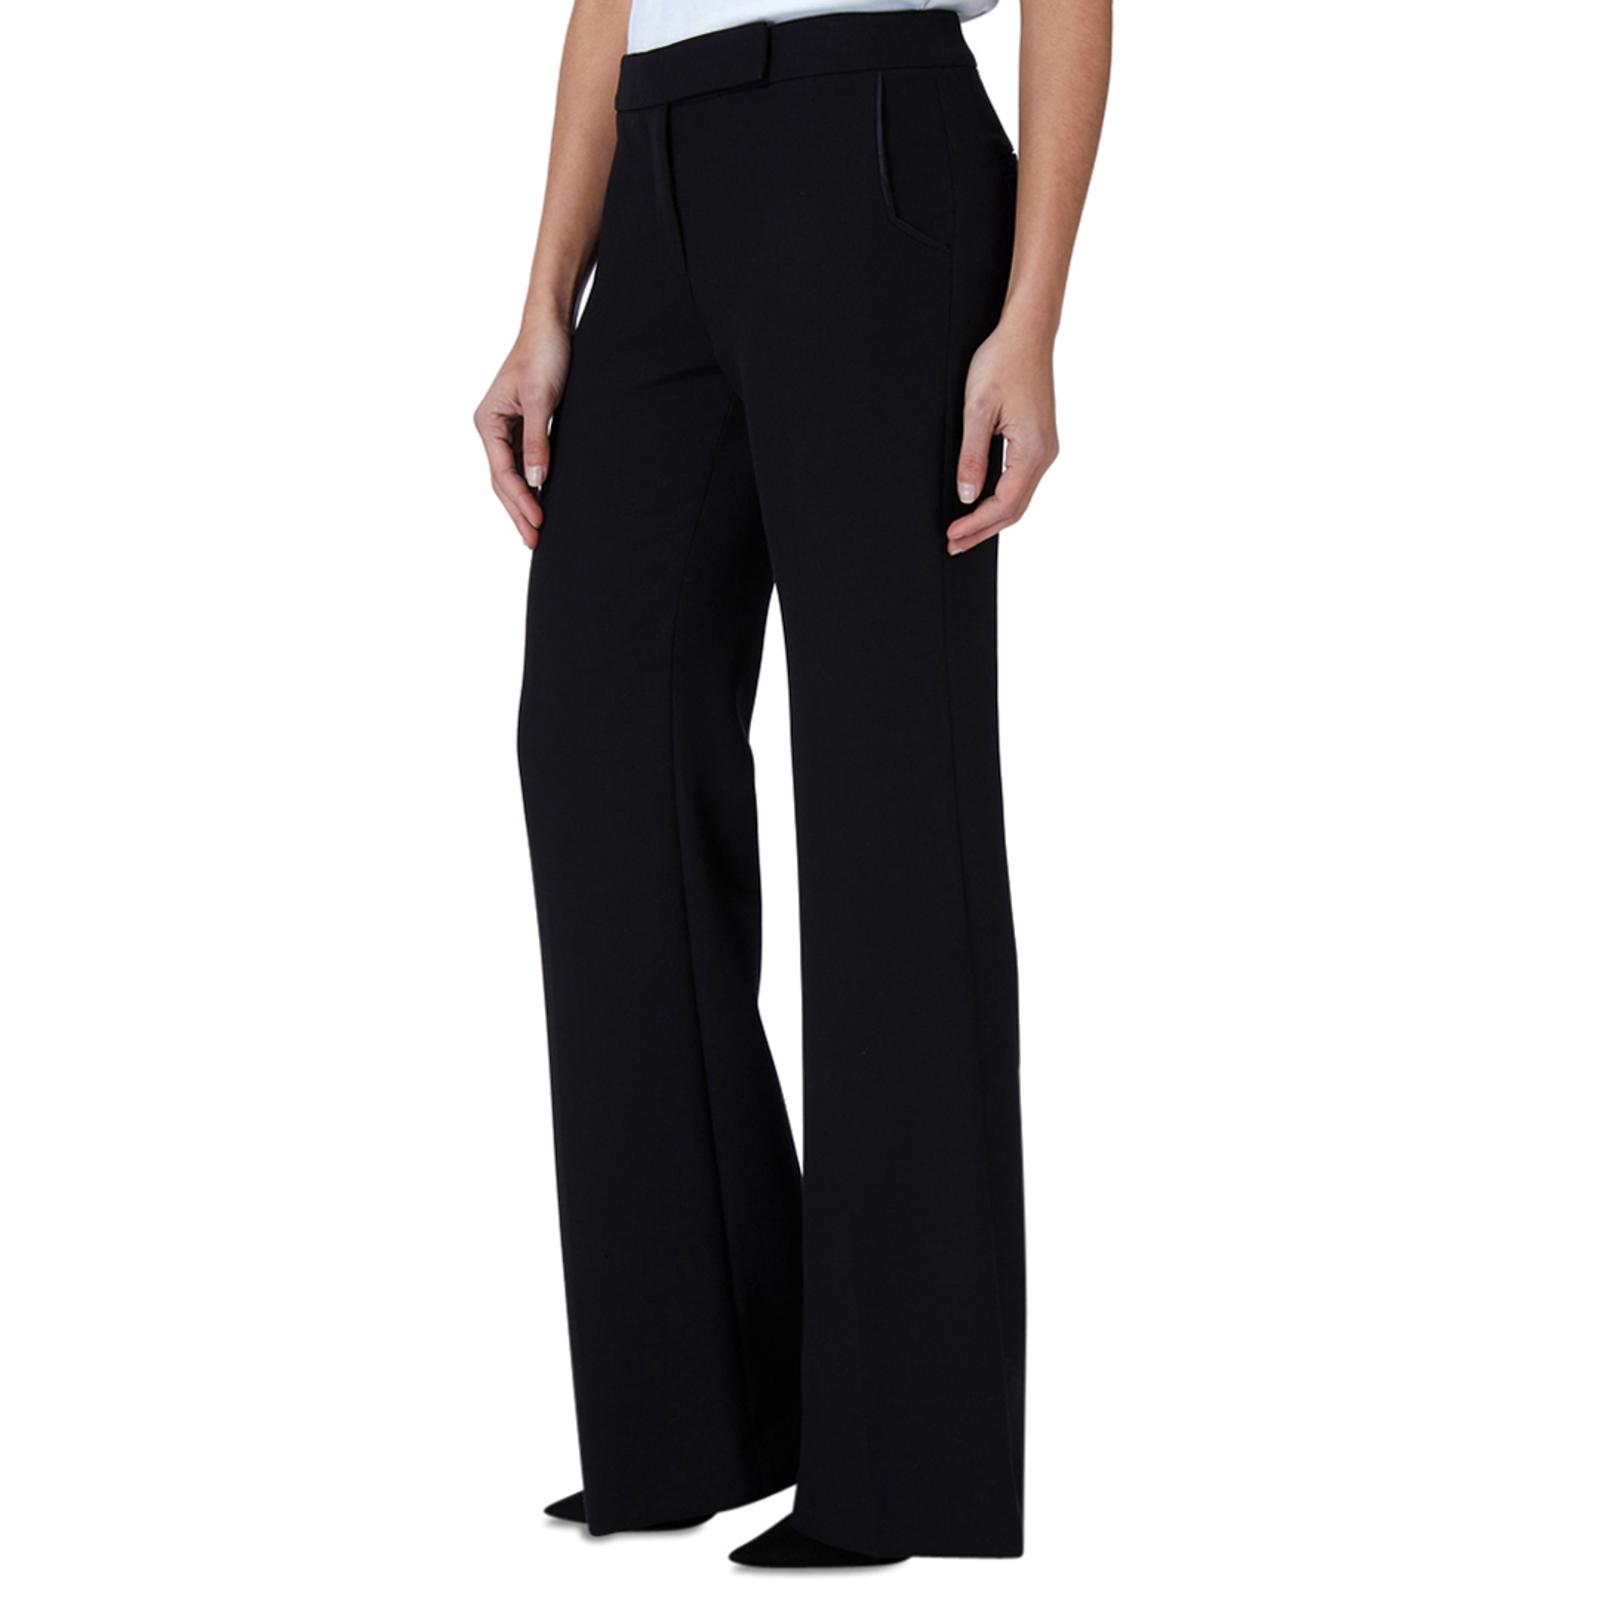 Black Asayii Sculpted Trousers - BrandAlley